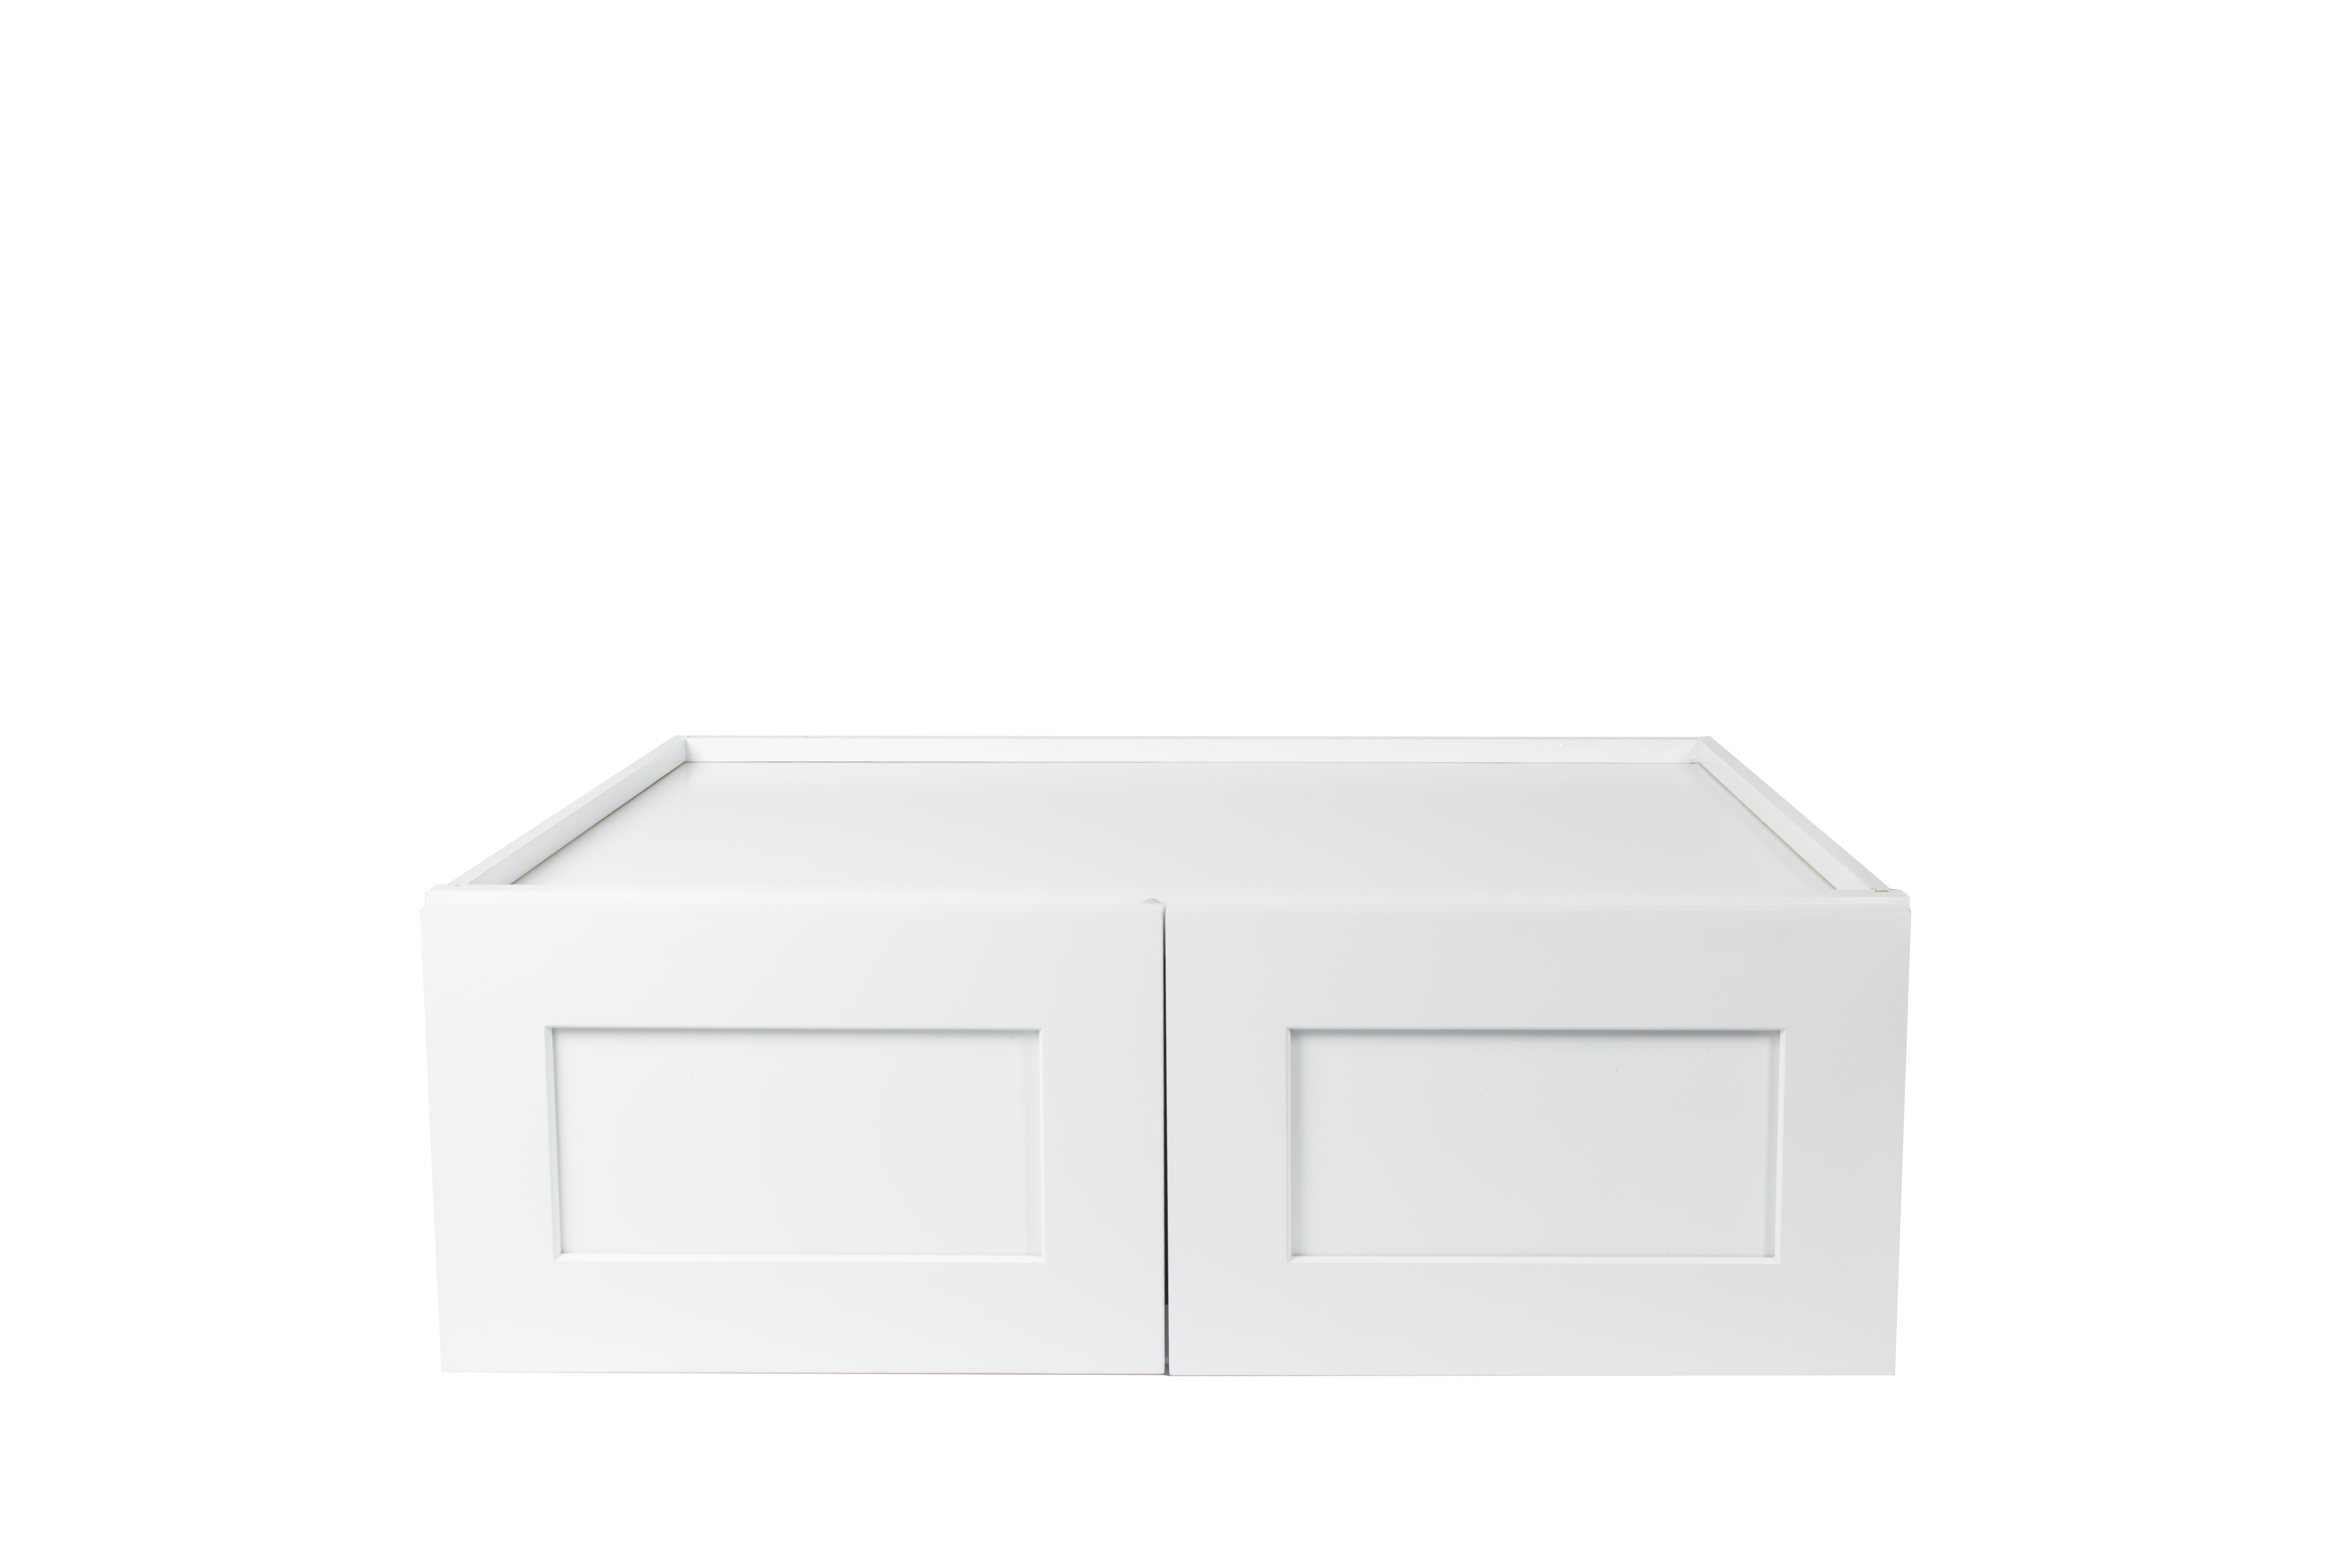 Ready to Assemble 30x12x12 in. Shaker High Double Door Wall Cabinet in White